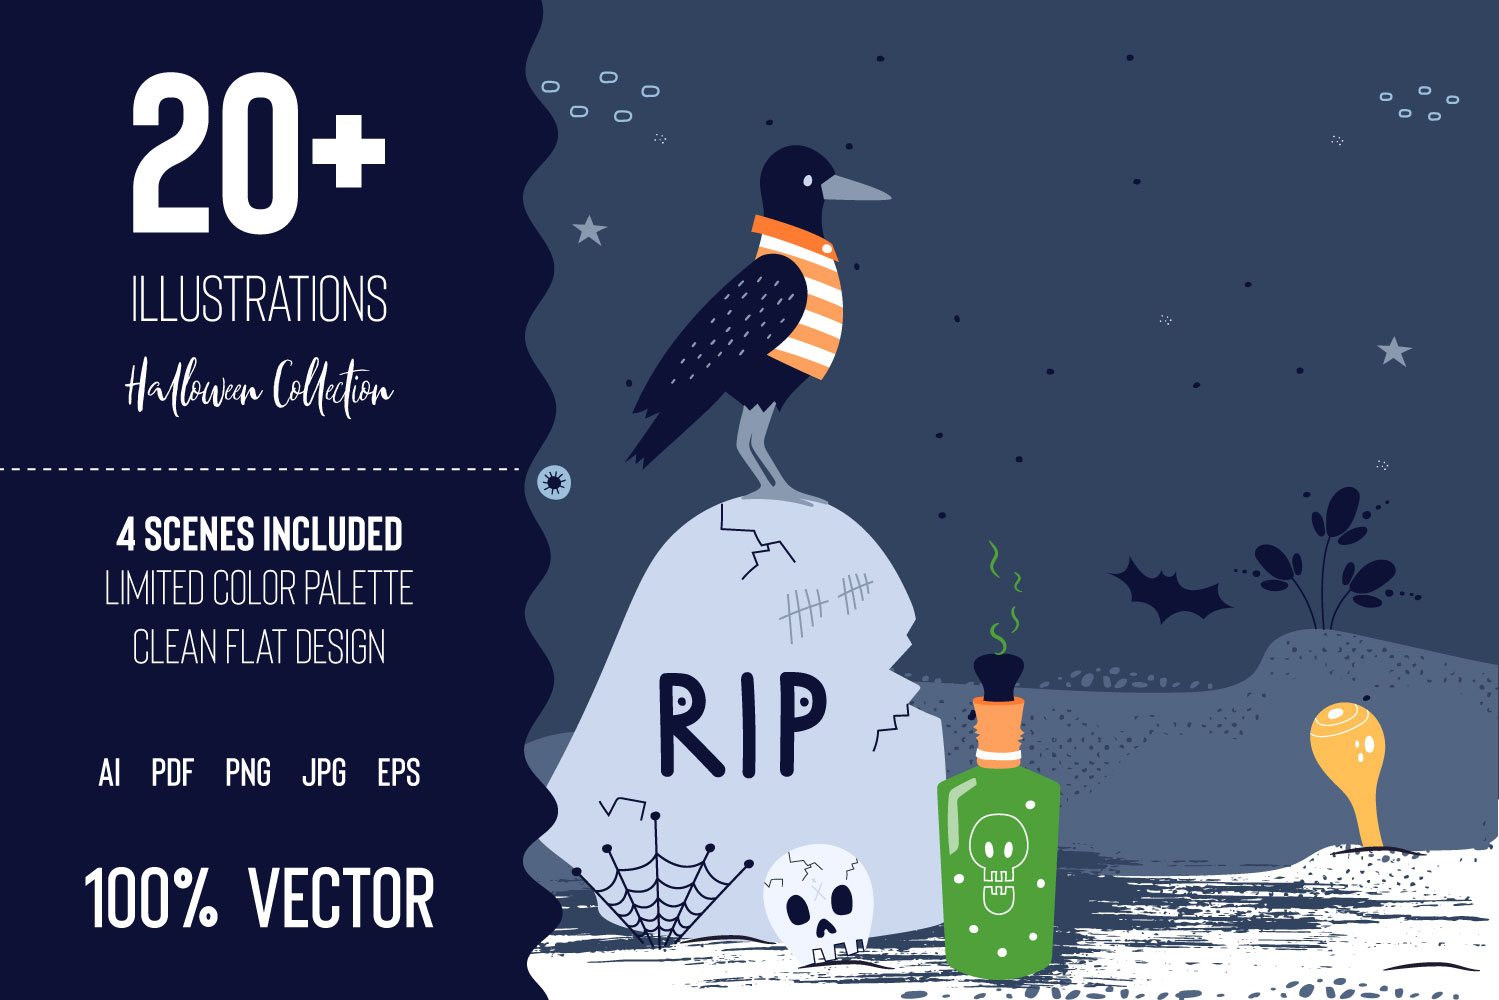 A beautiful collection of vector Halloween illustrations and ready-made scenes